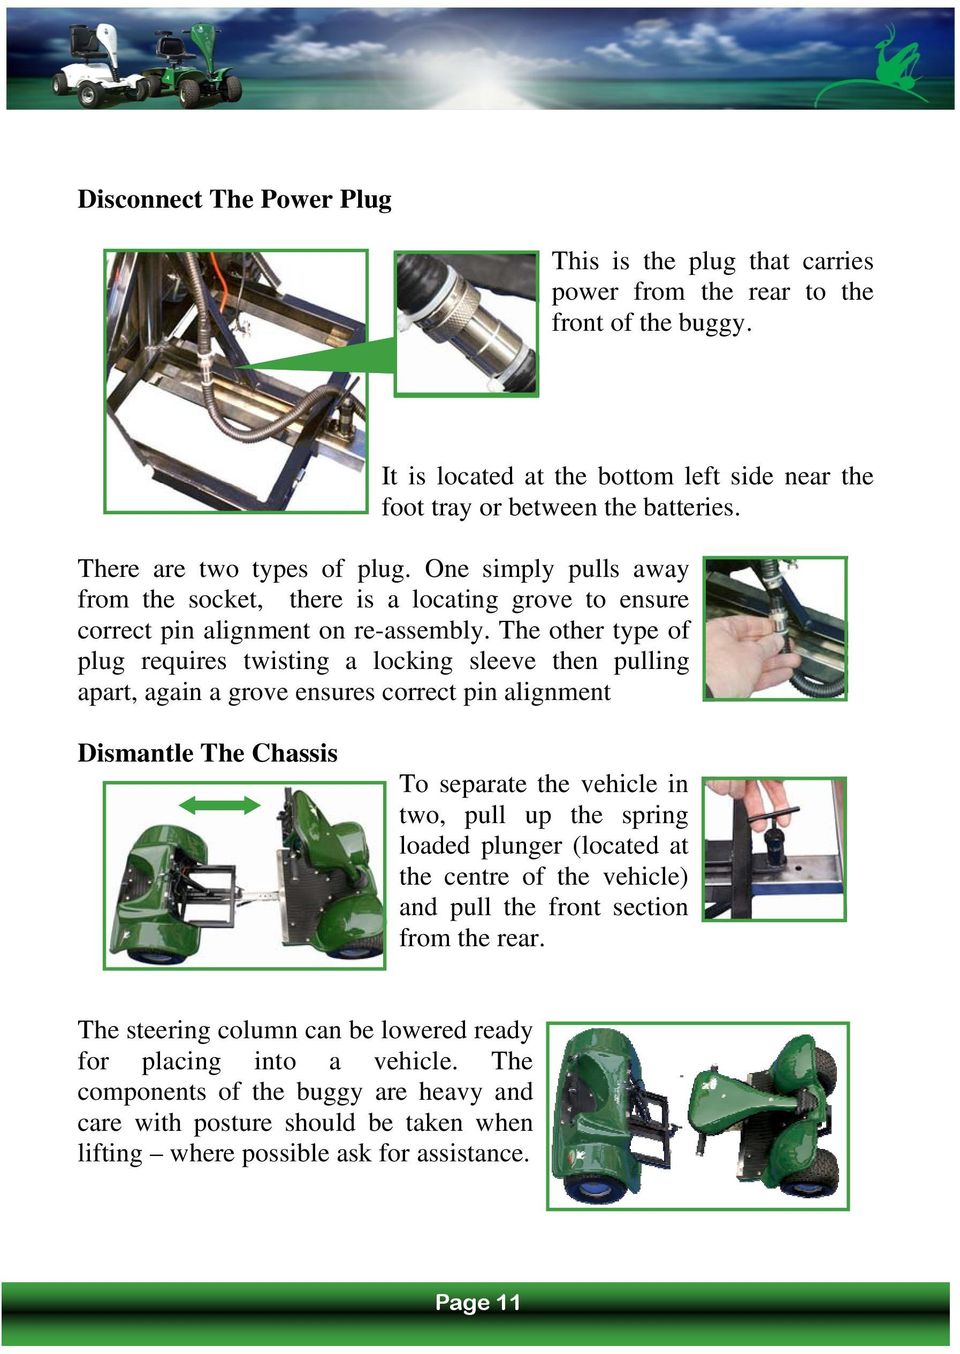 The other type of plug requires twisting a locking sleeve then pulling apart, again a grove ensures correct pin alignment Dismantle The Chassis To separate the vehicle in two, pull up the spring